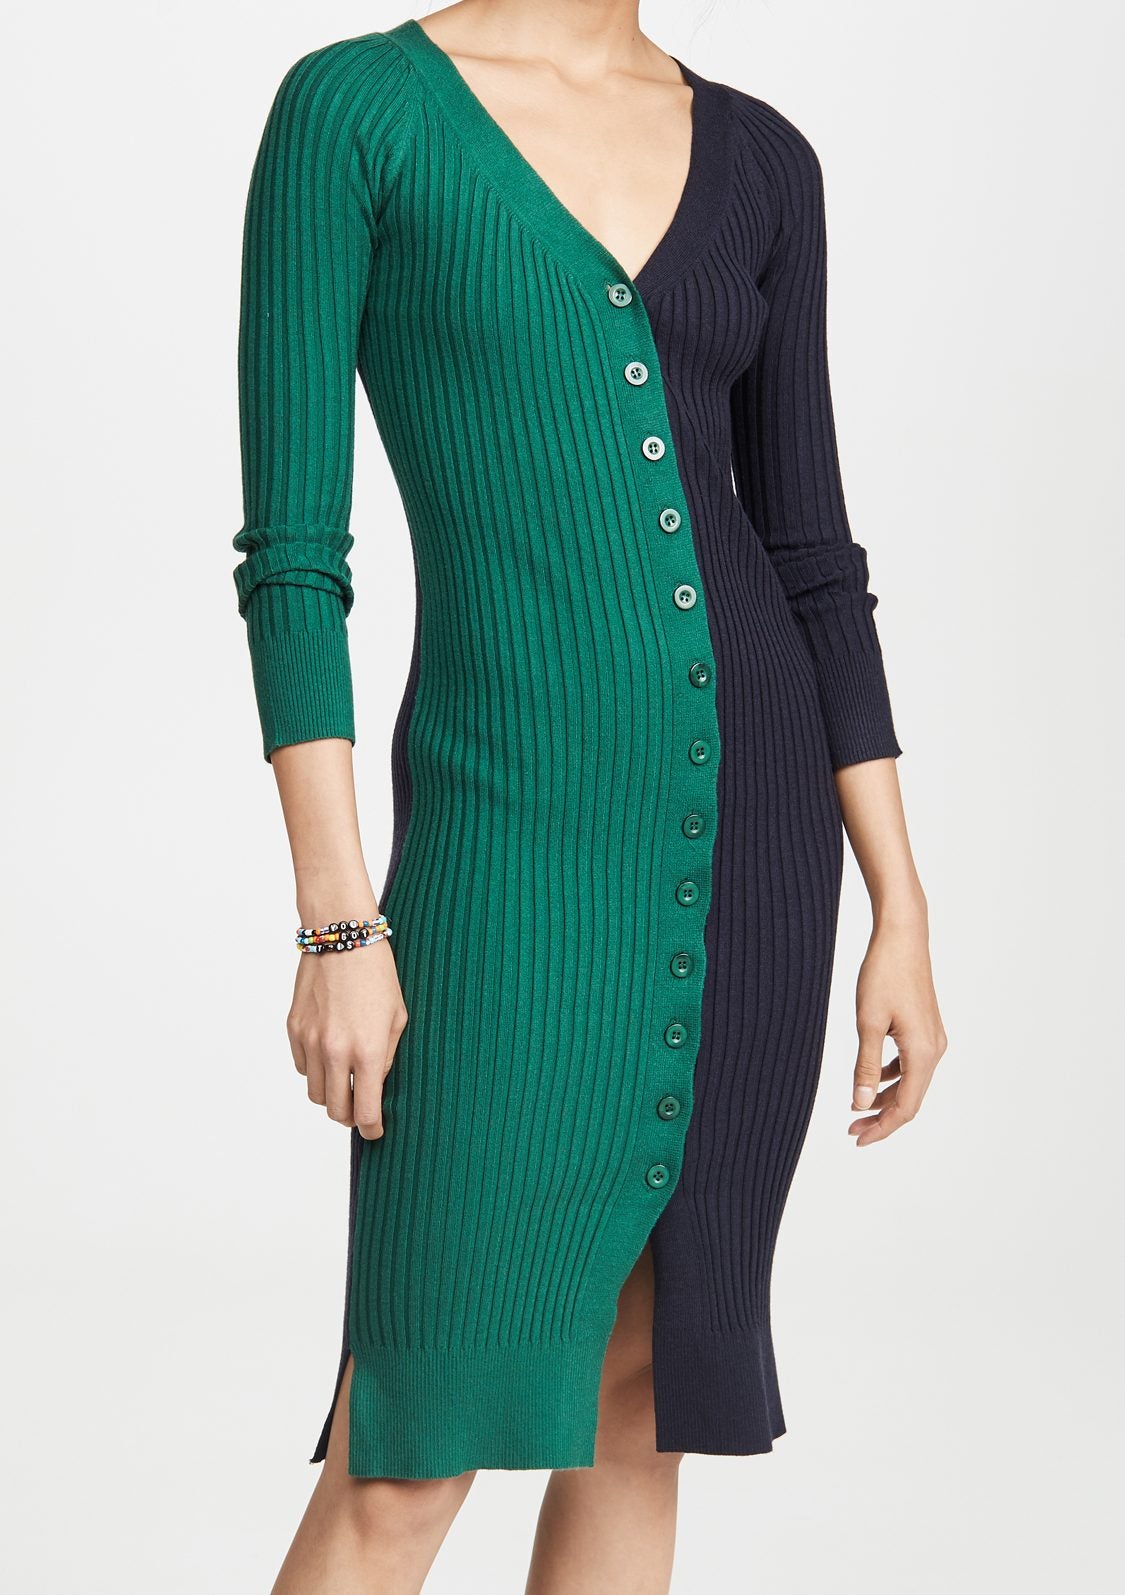 Keep It Cute & Warm With These Chic Sweater Dresses